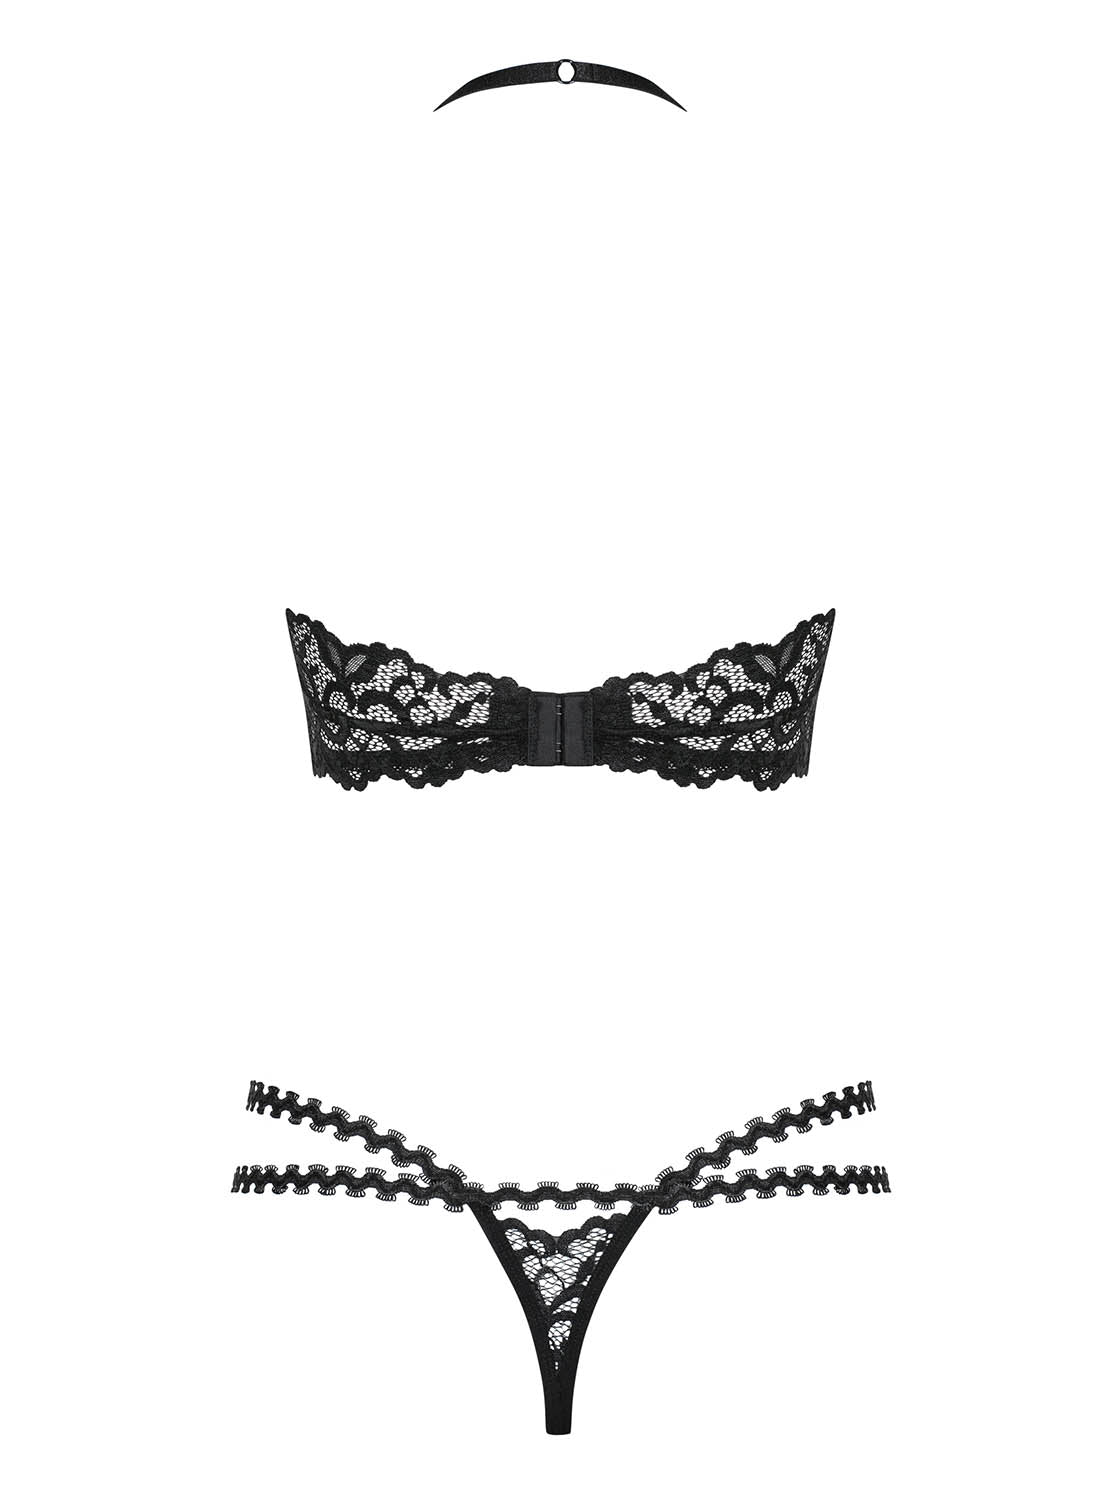 Joylace a magical lace set of halterneck bra and a matching thong with a special design